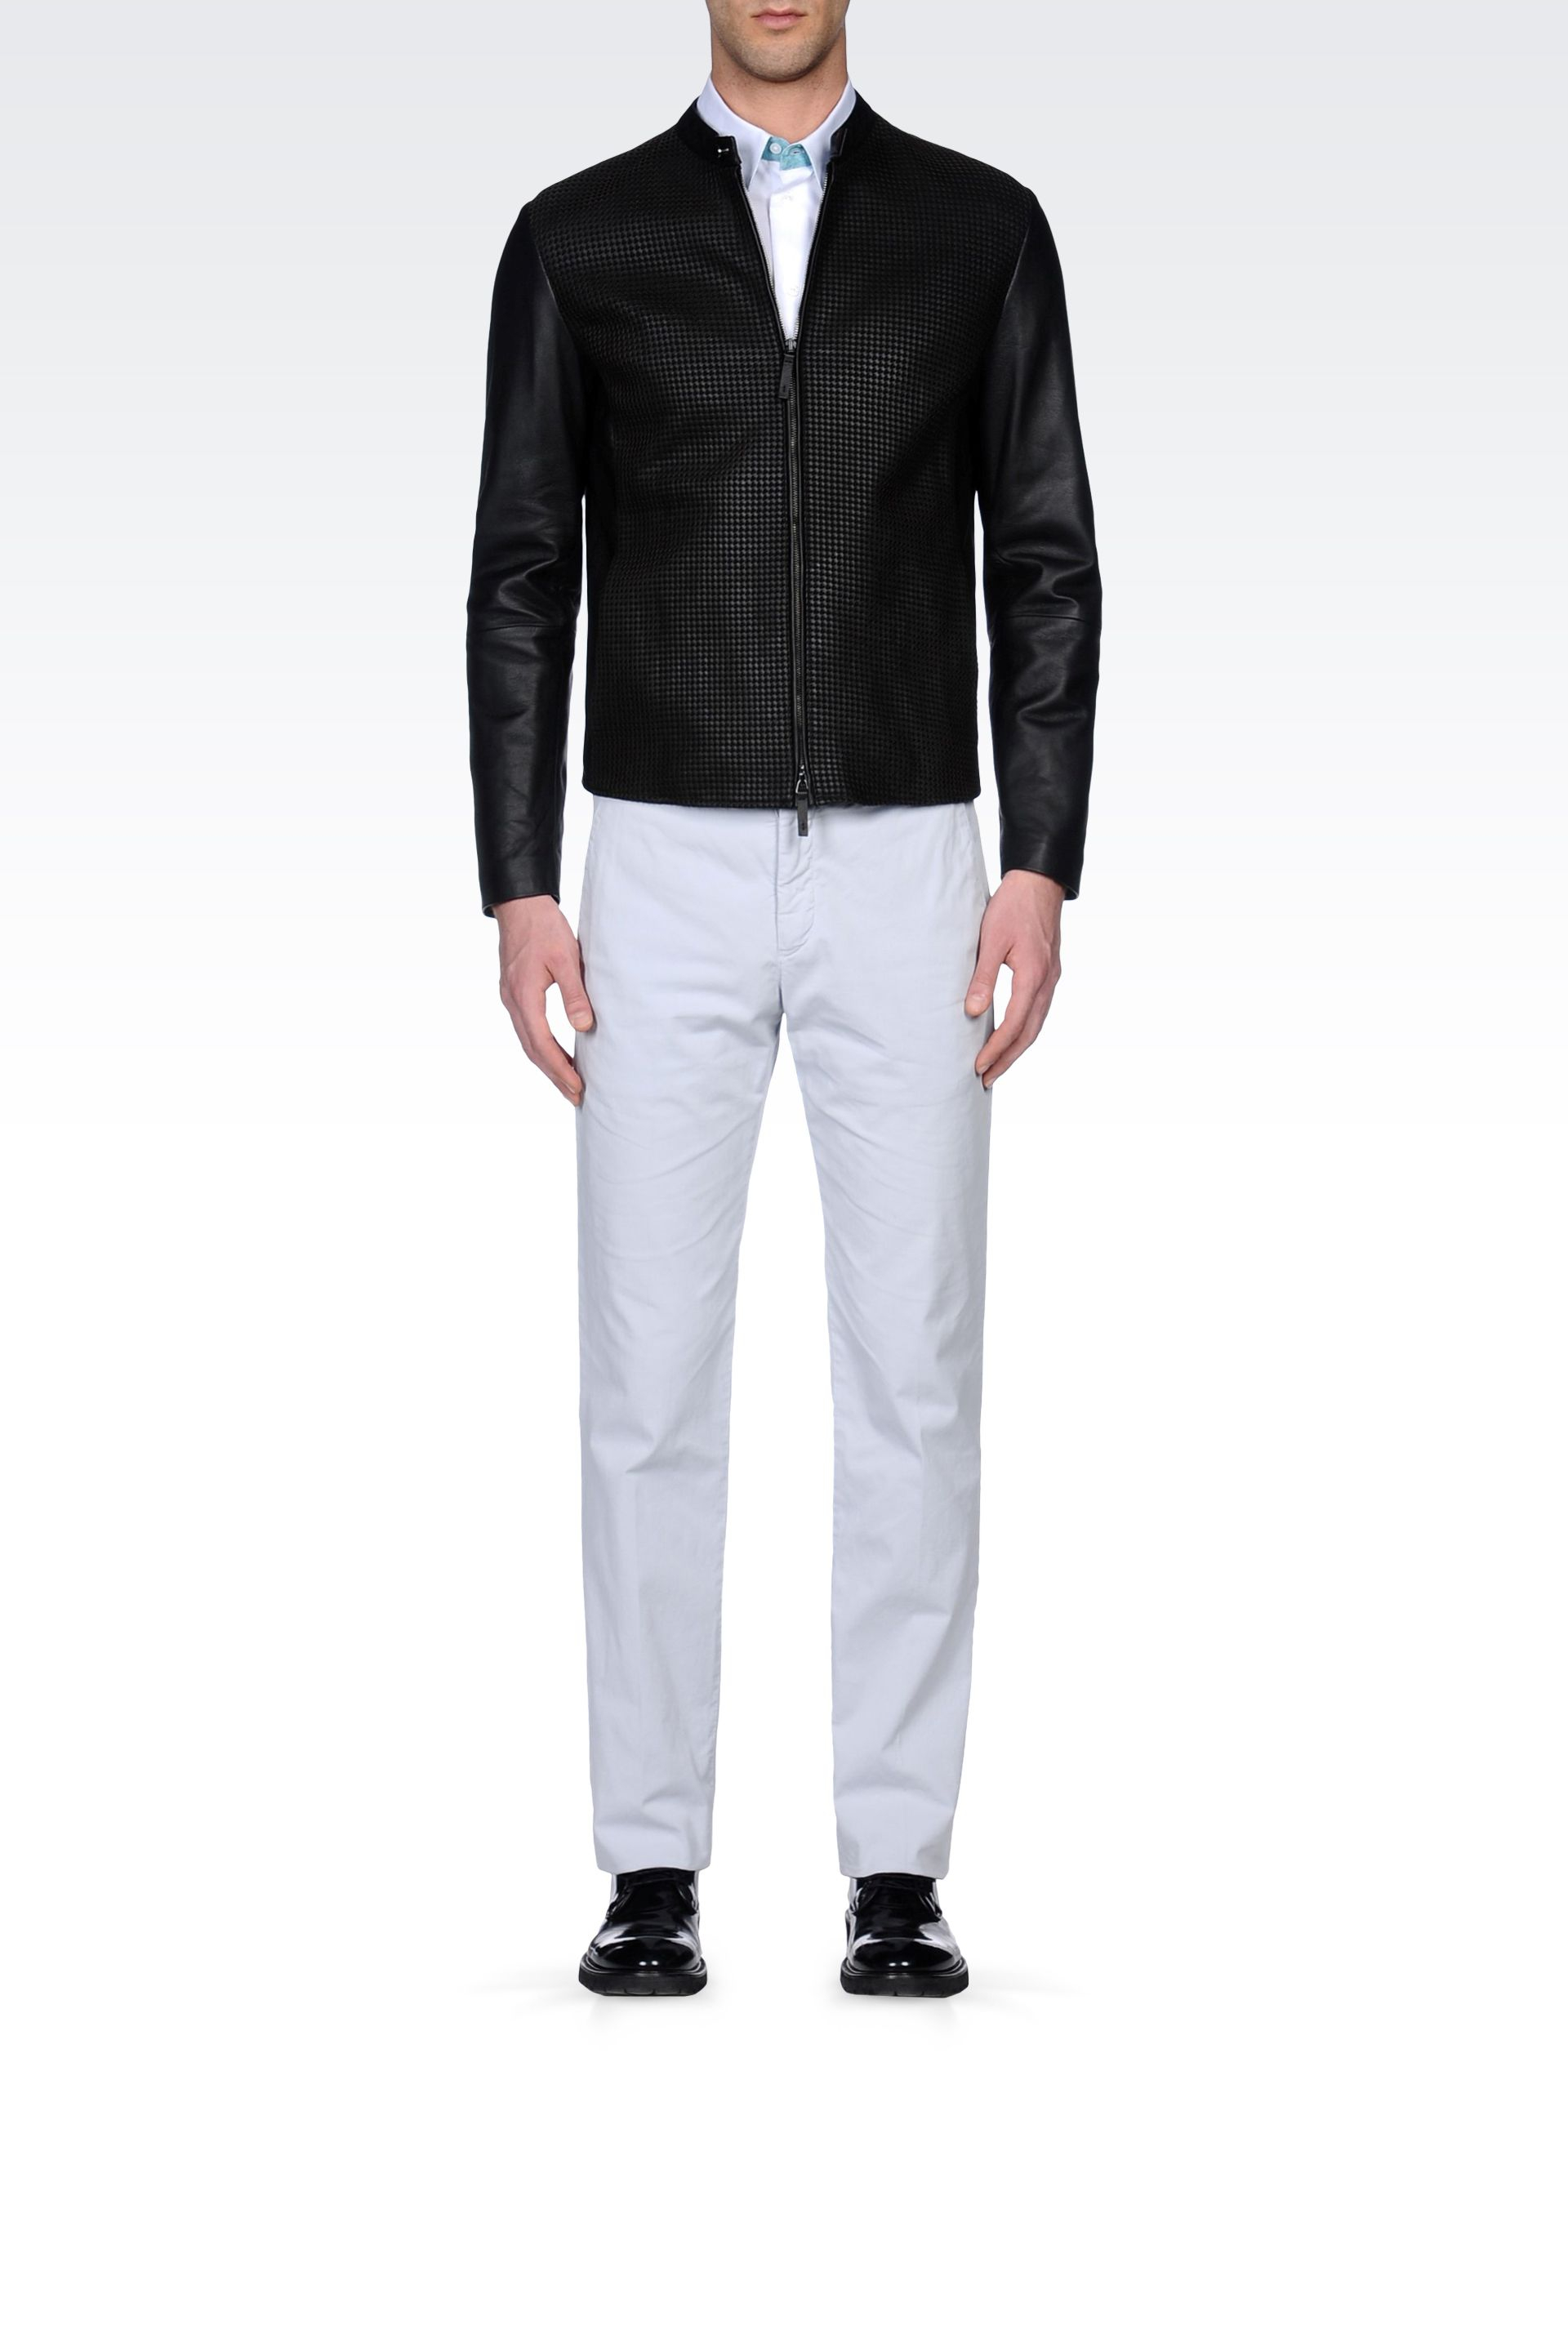 Armani Jacket in Lasered Leather in Black for Men | Lyst